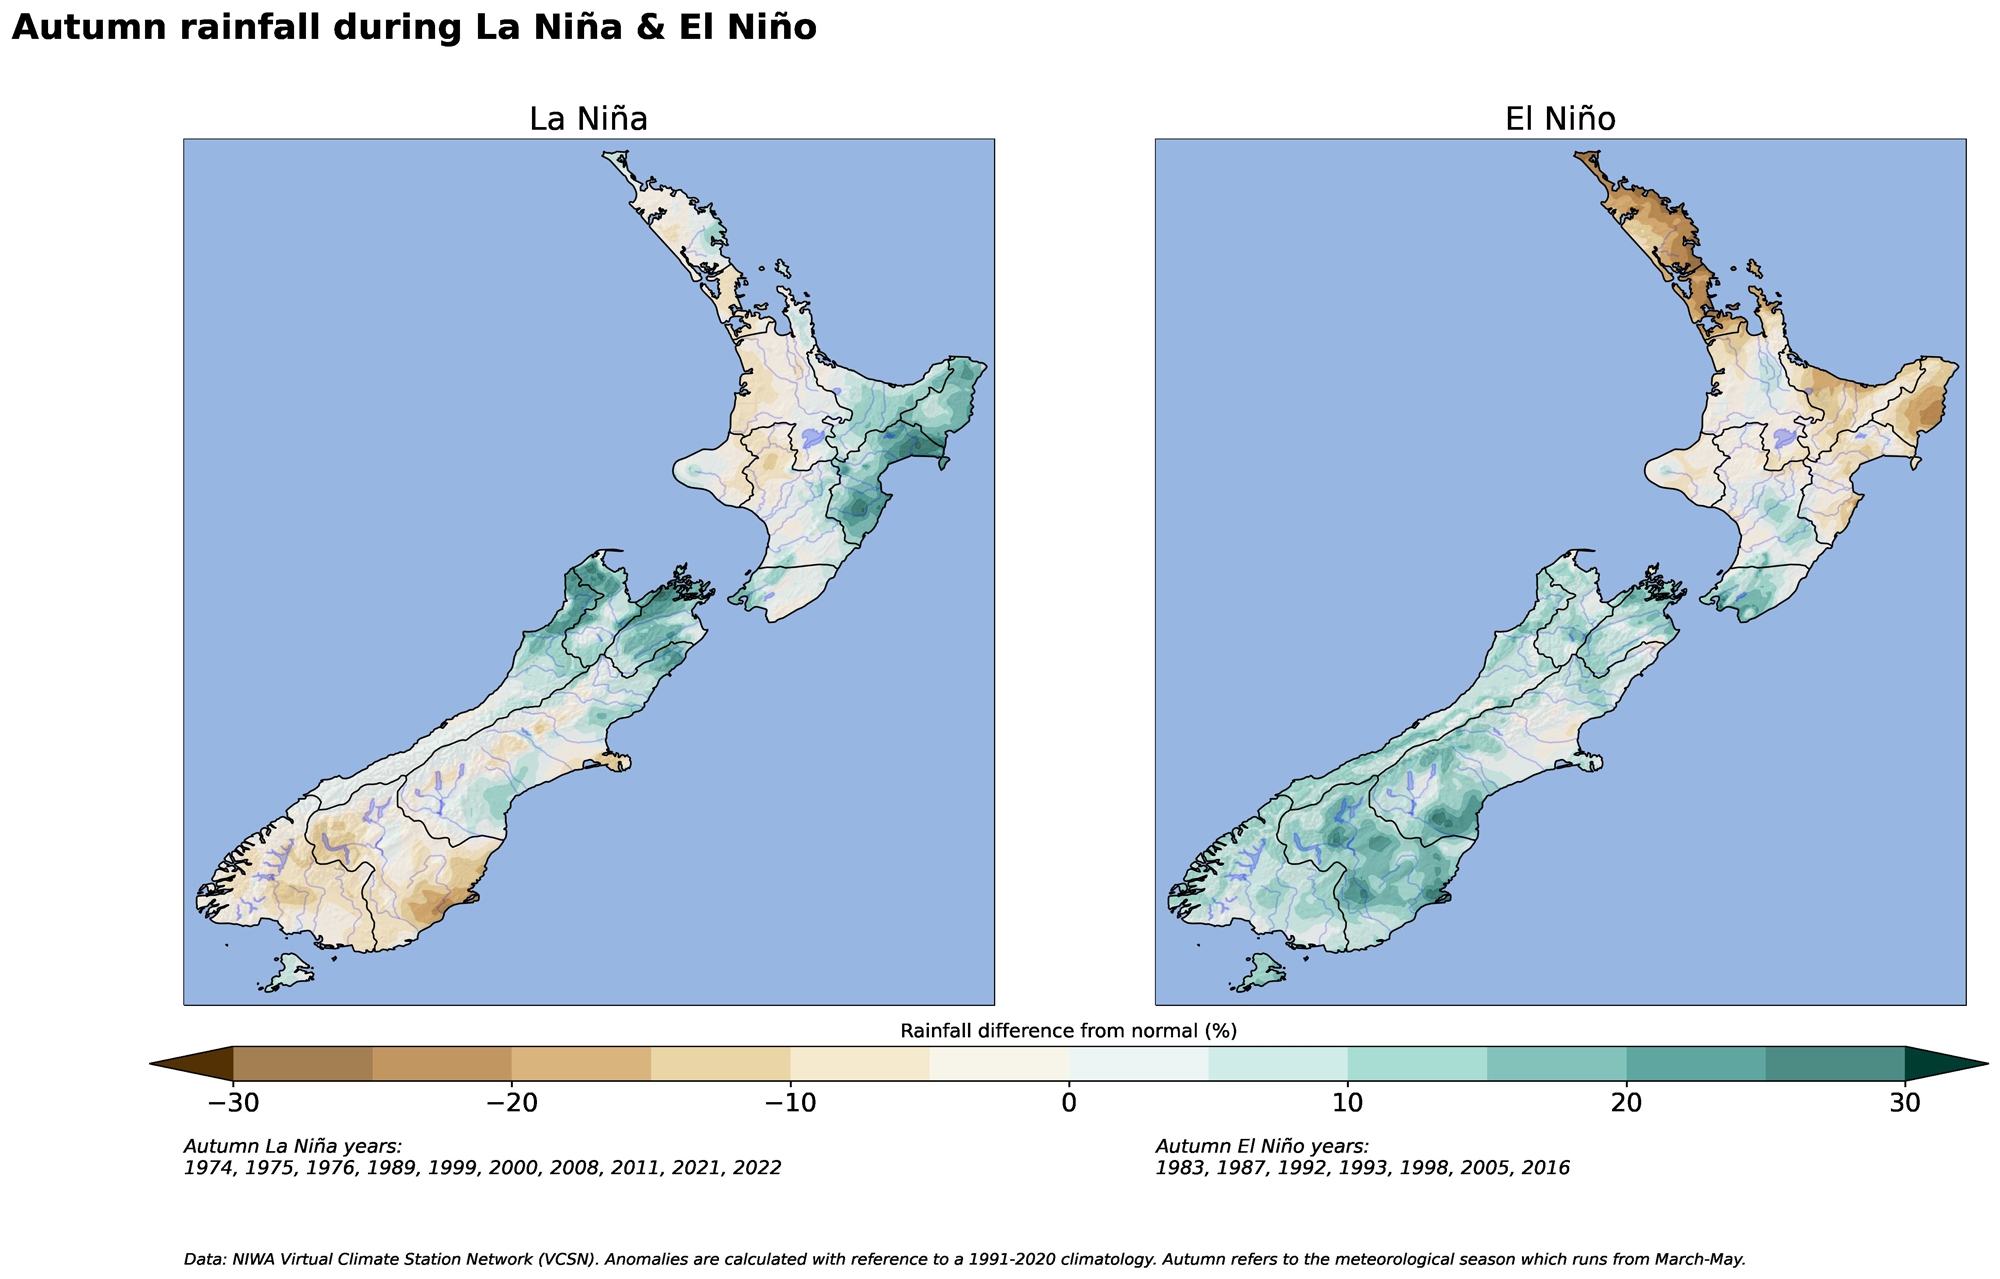 New Zealand maps of % difference of autumn rainfall from normal during La Niña and El Niño from year 1974 to 2022.